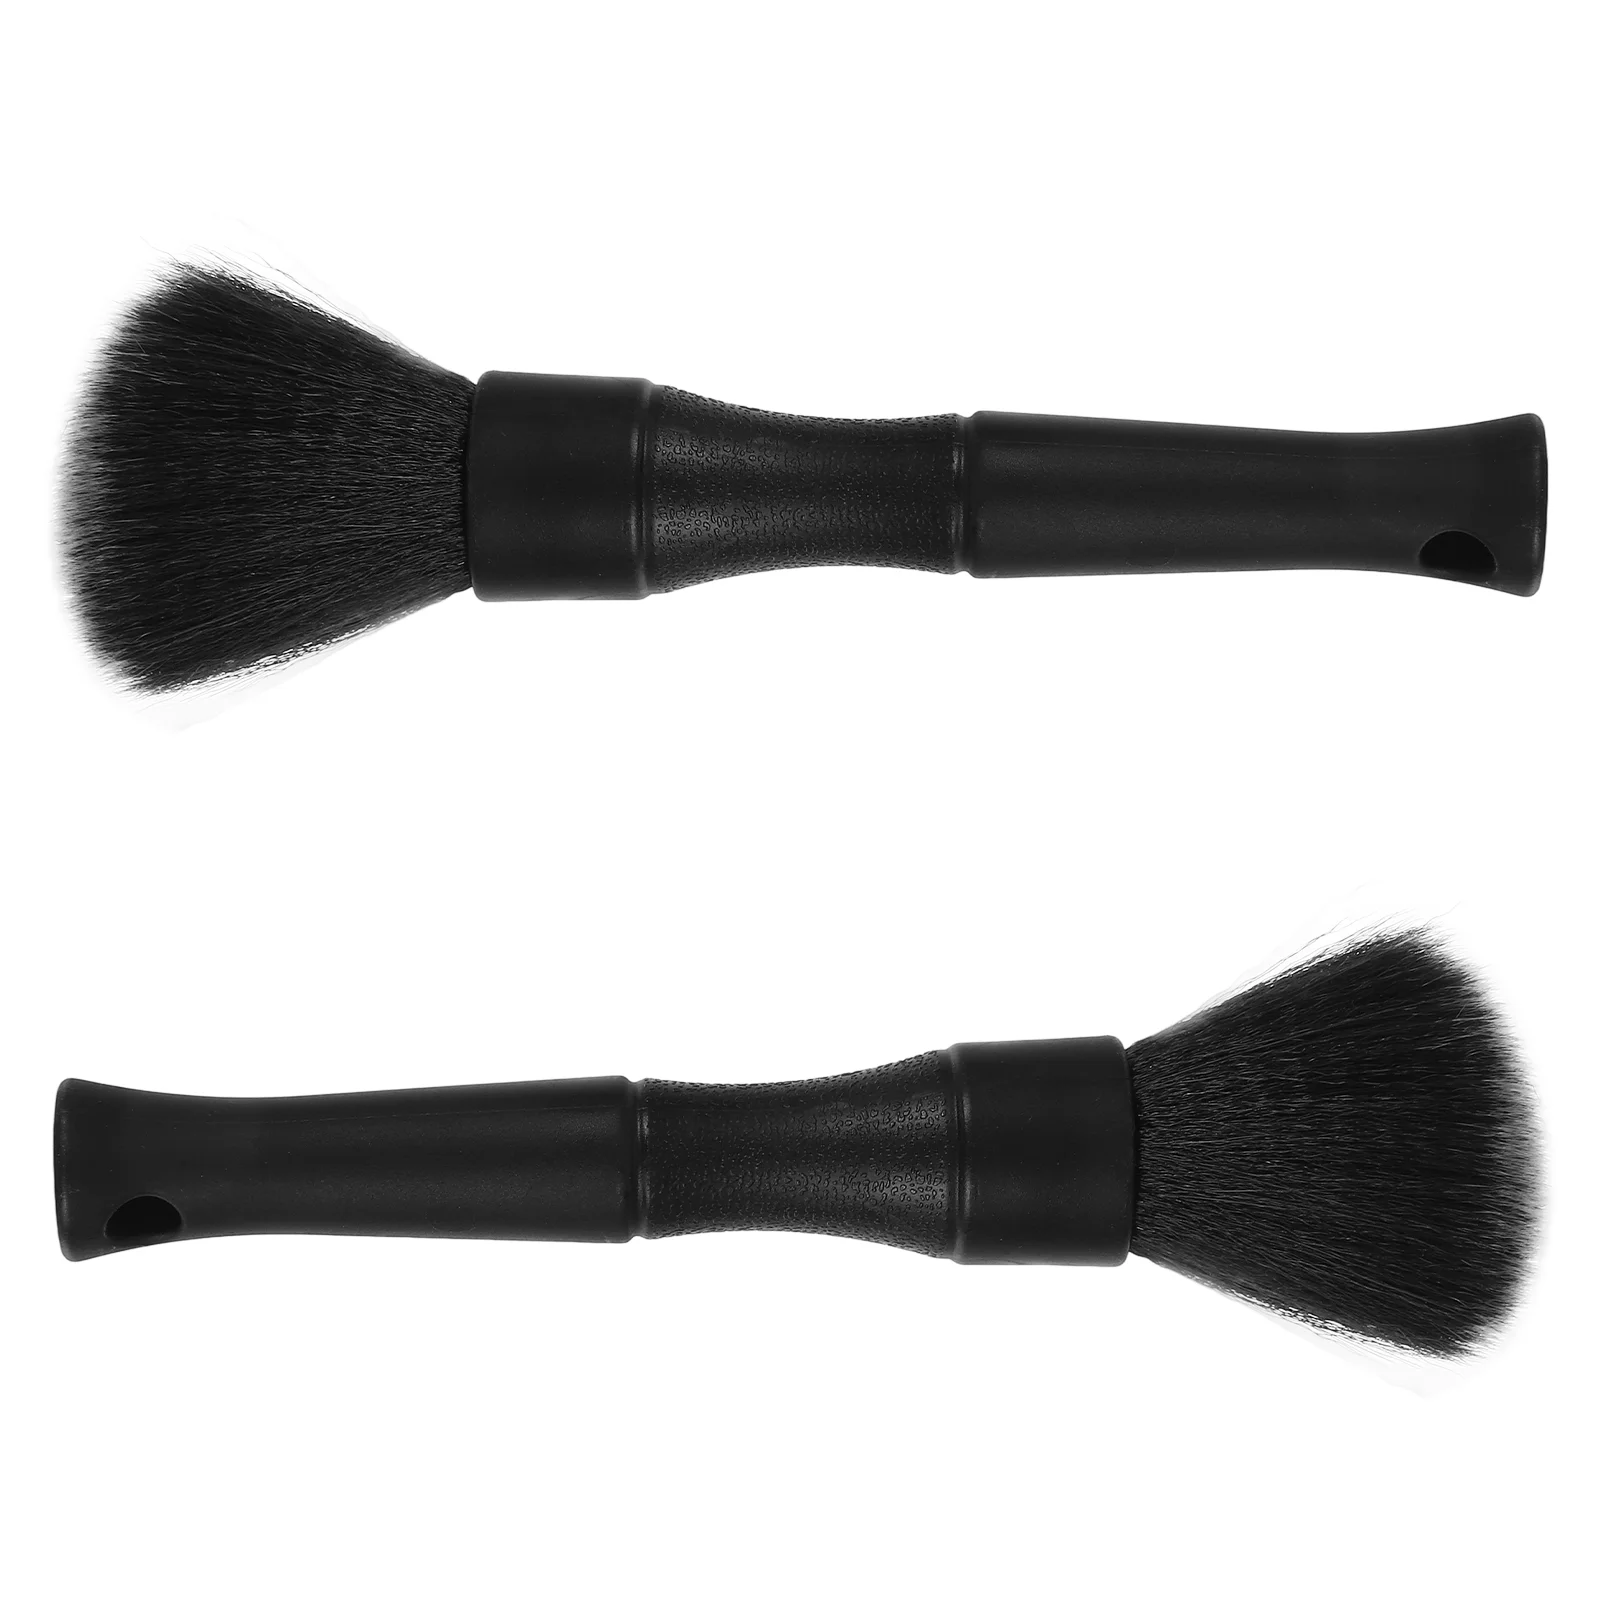 

2 Pcs Car Detail Brush Motorcycle Detailing Kit Dash Kits for Vehicles Cleaner Interior Auto So Soft Supplies